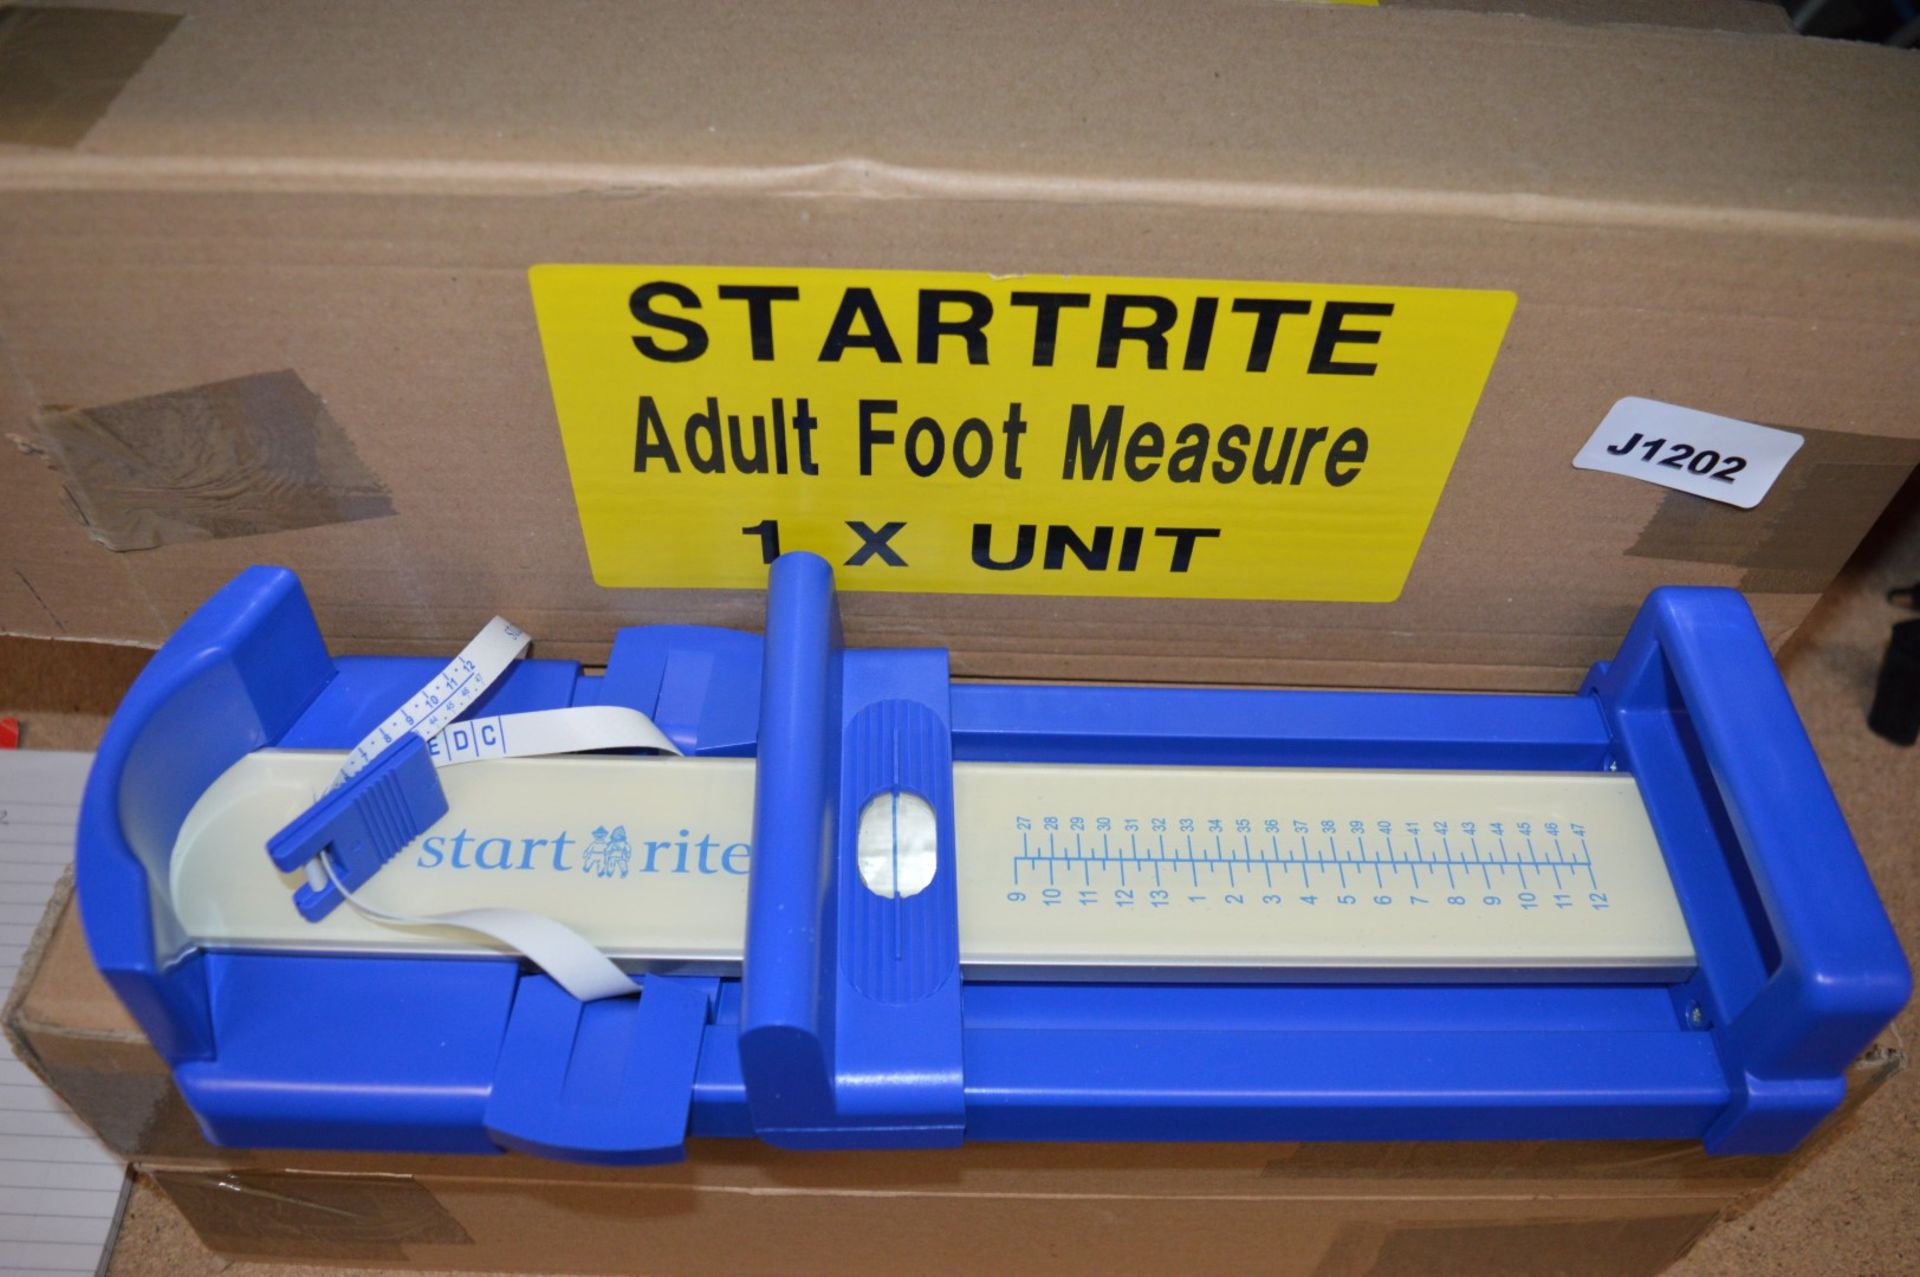 4 x Startrite Adult Foot Measures - Brand New - CL285 - Ref J1102 - Location: Altrincham WA14 - Image 2 of 3